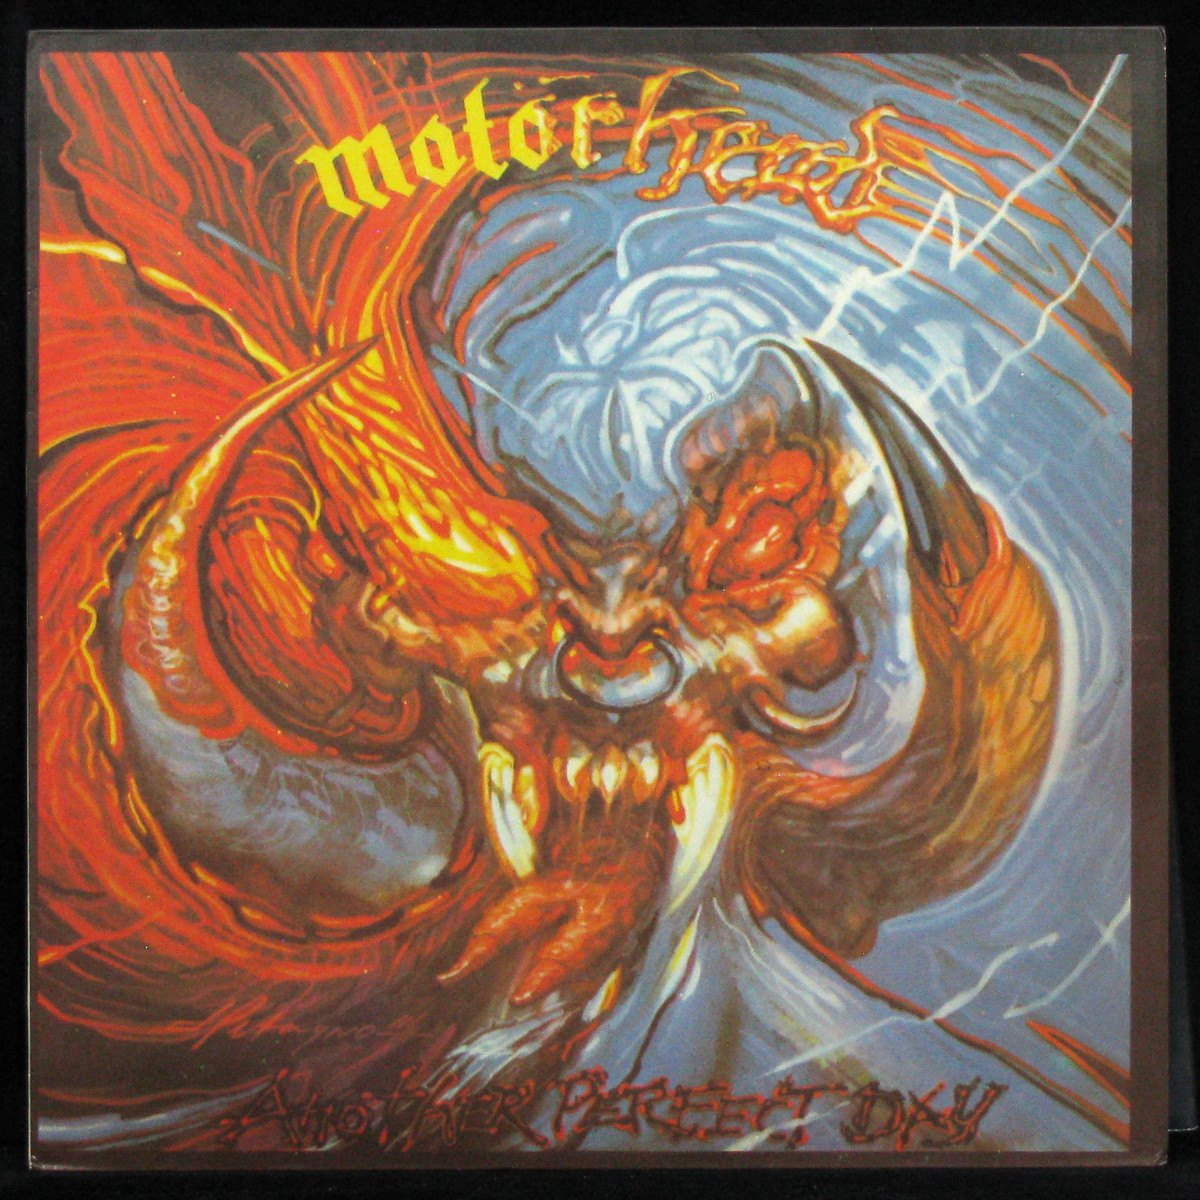 LP Motorhead — Another Perfect Day фото